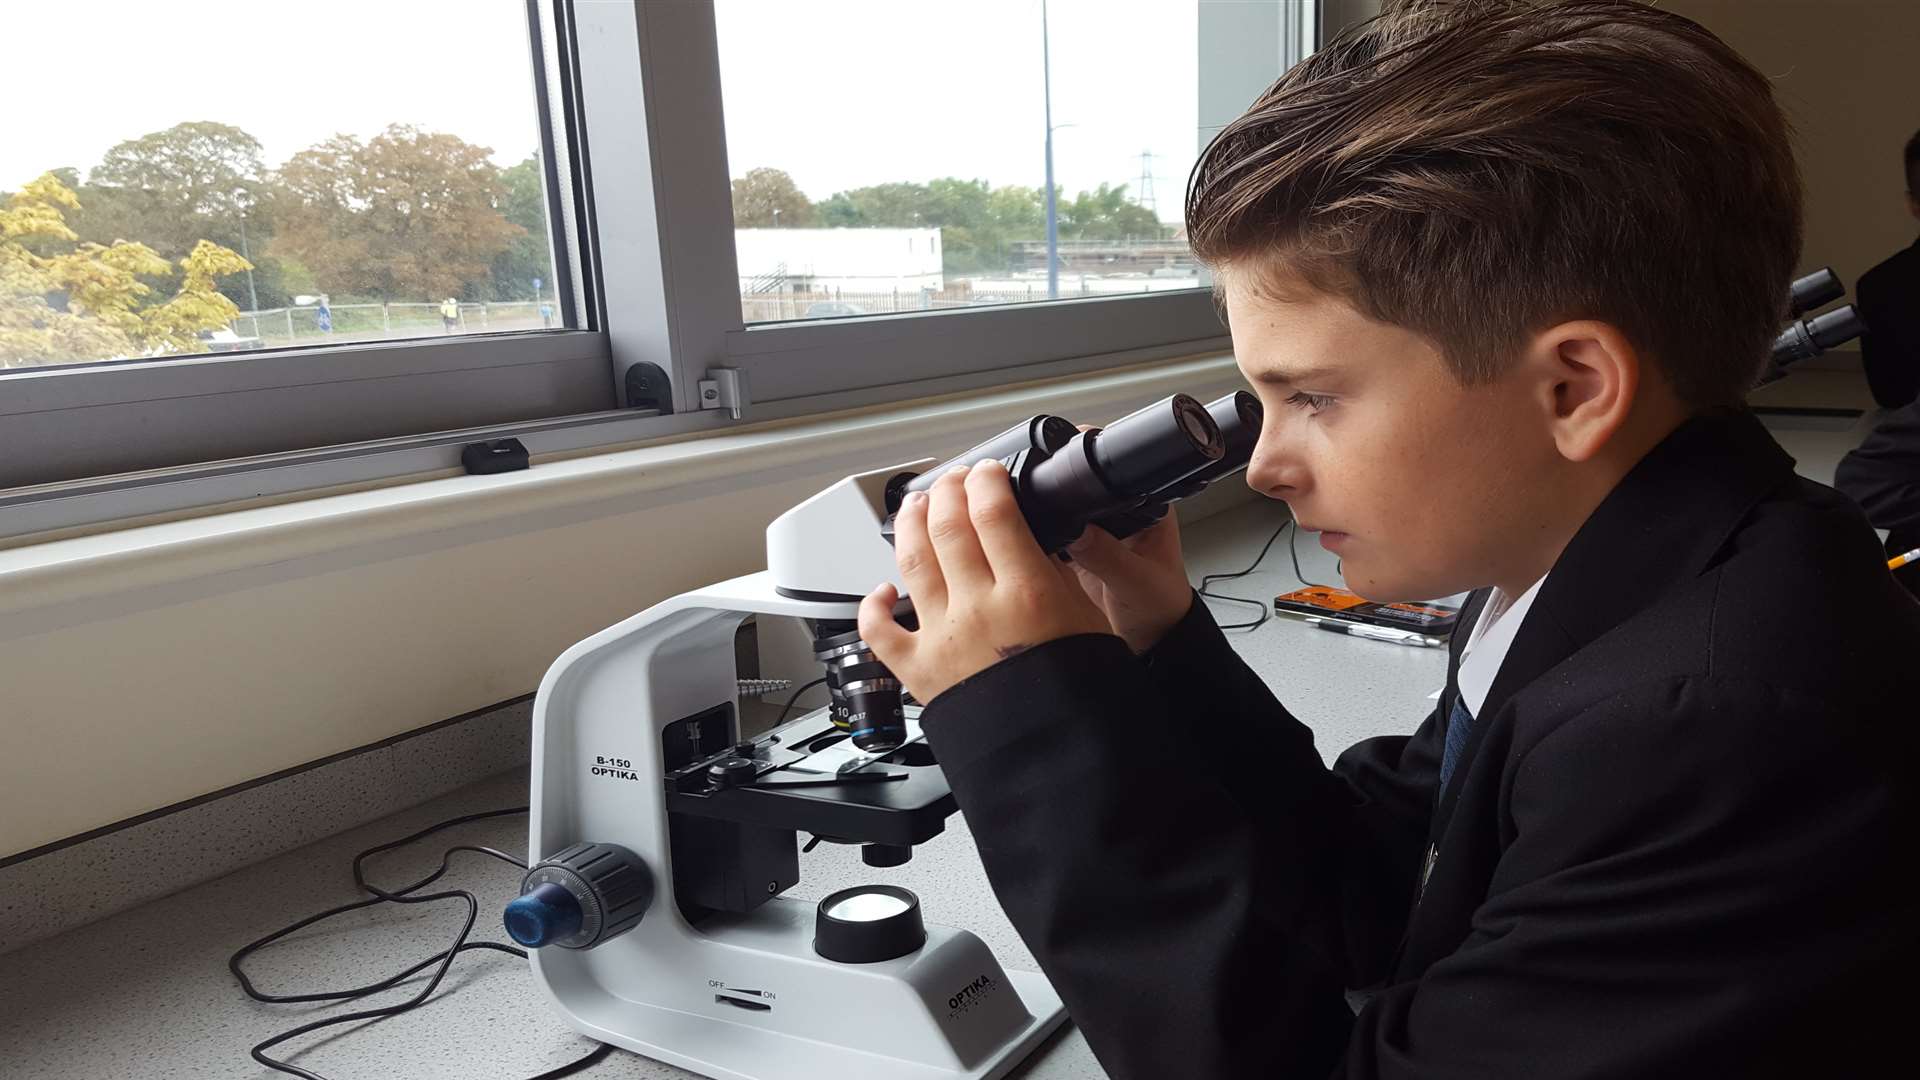 Thomas Barrett, 11, examines cells under the microscope in a science class